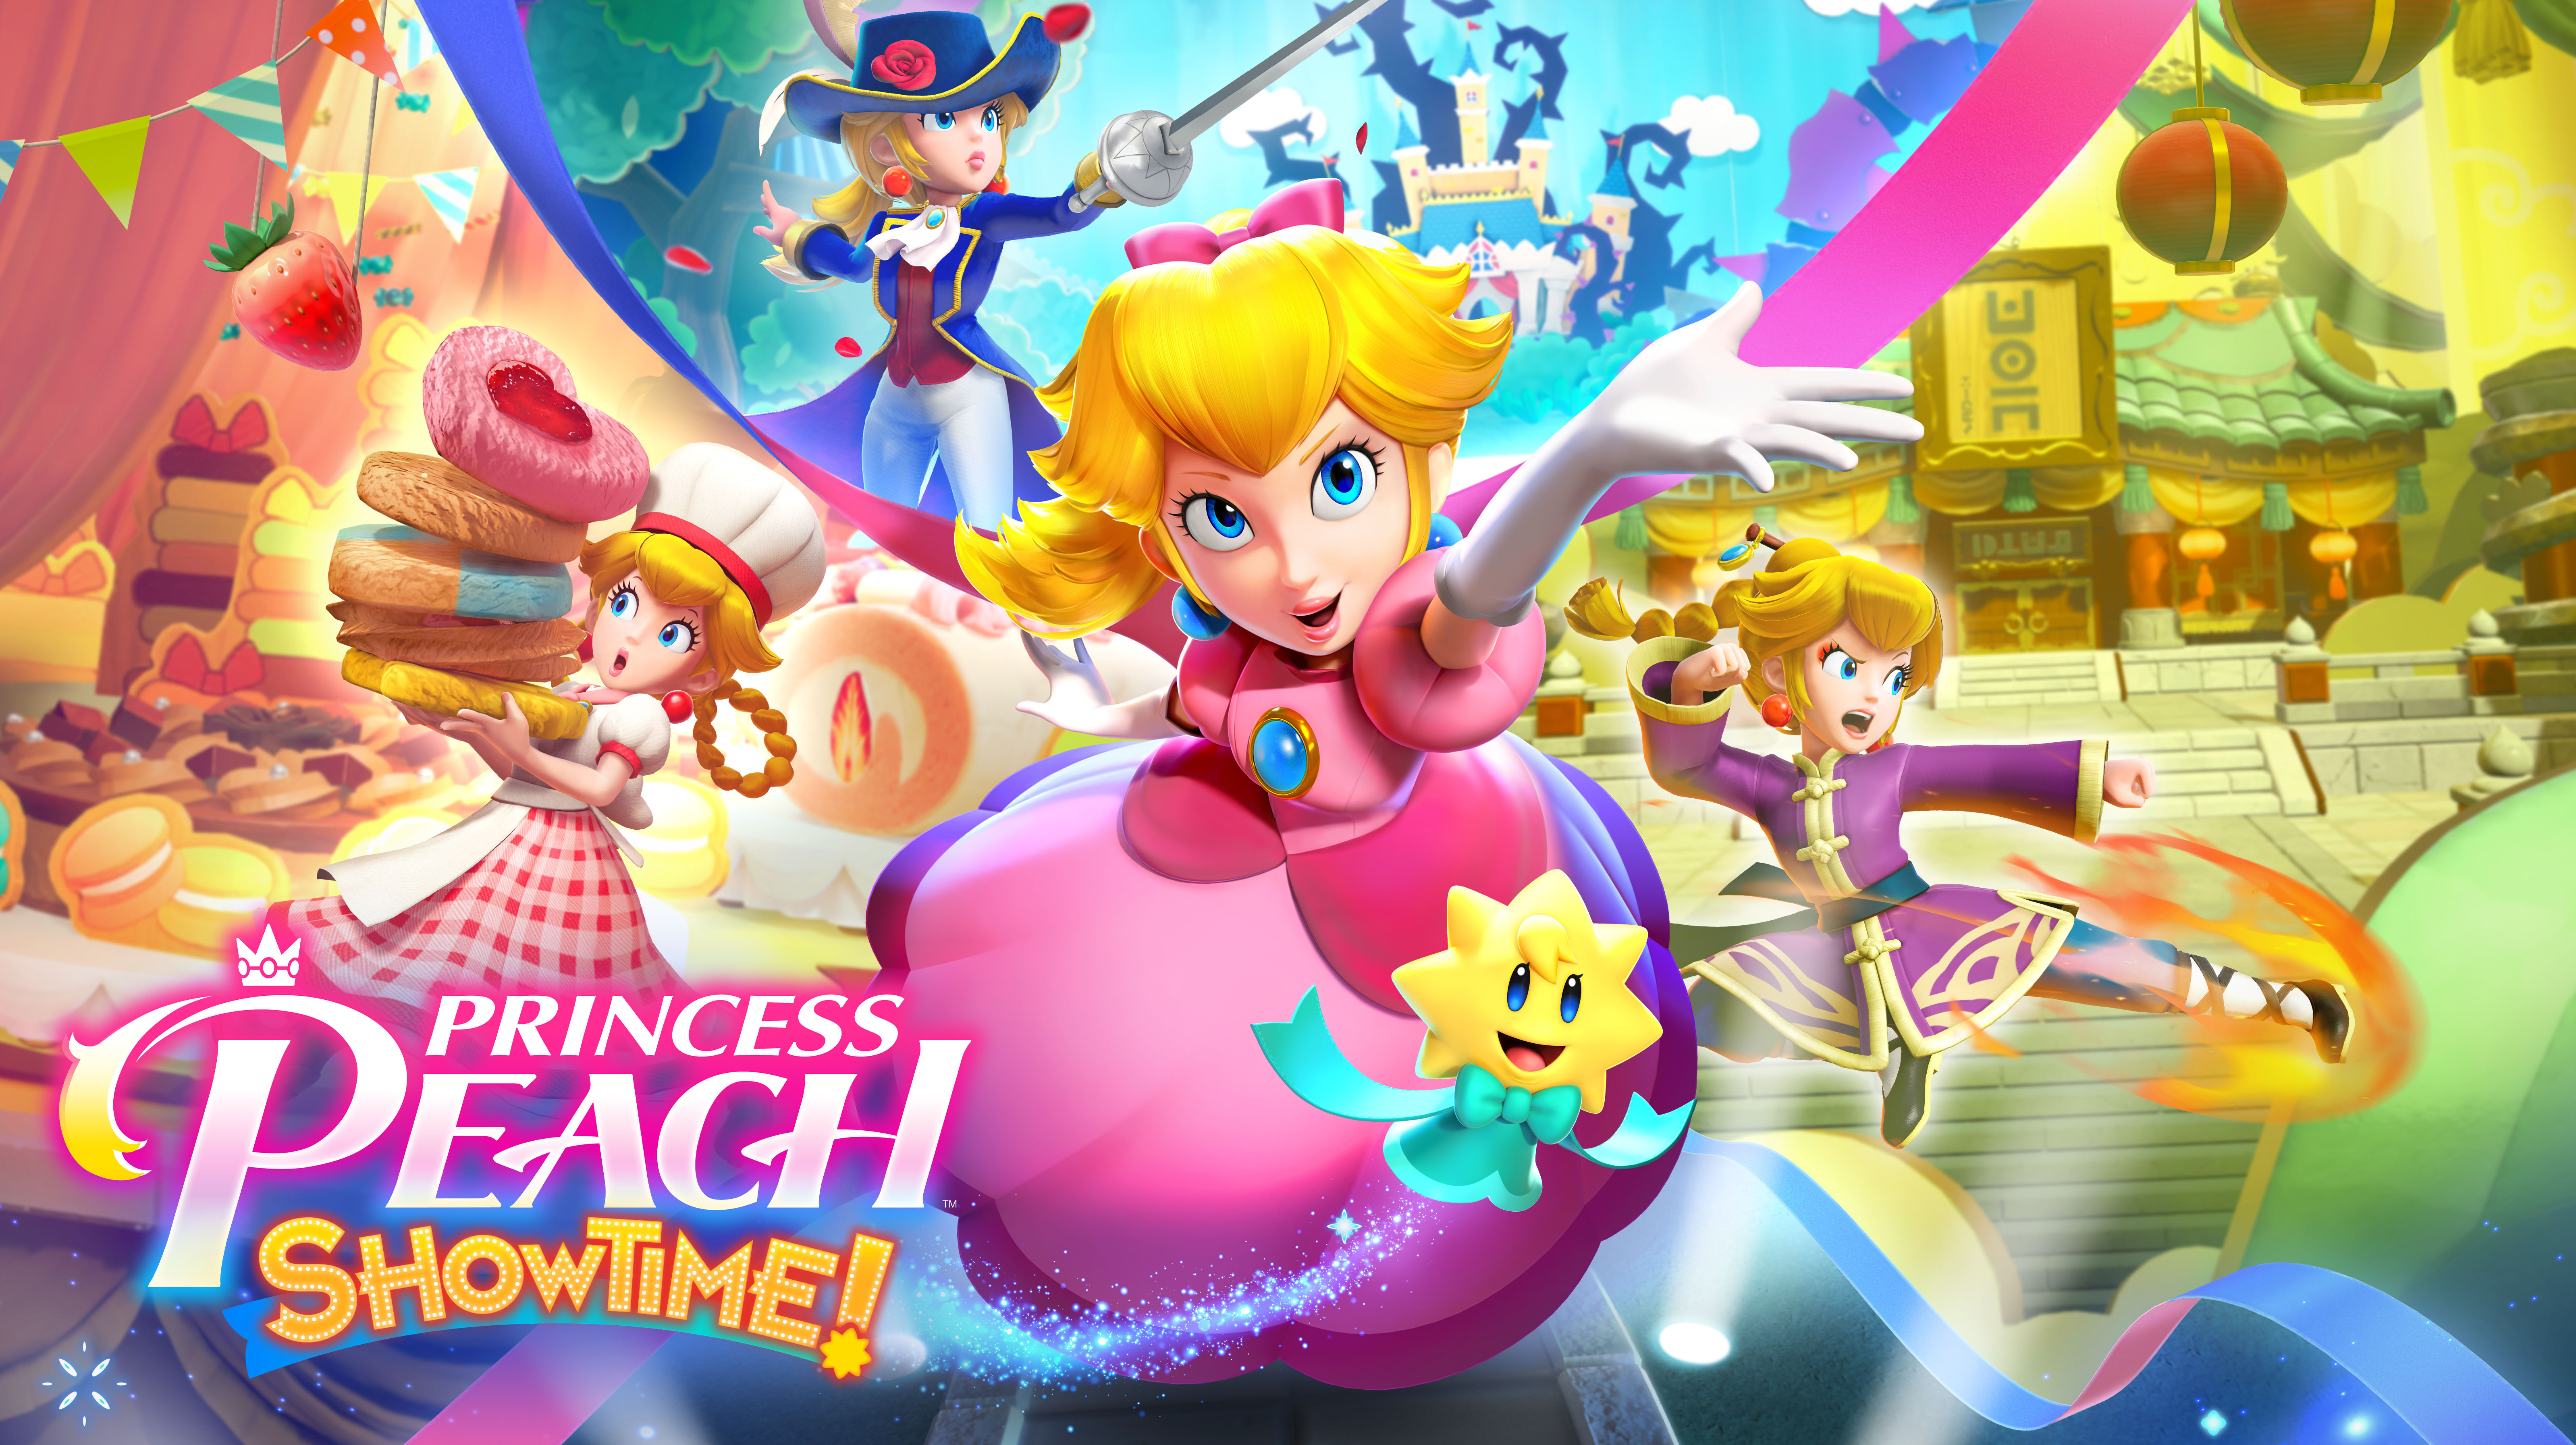 Why Princess Peach: Showtime! is Making Room for Female Gamers